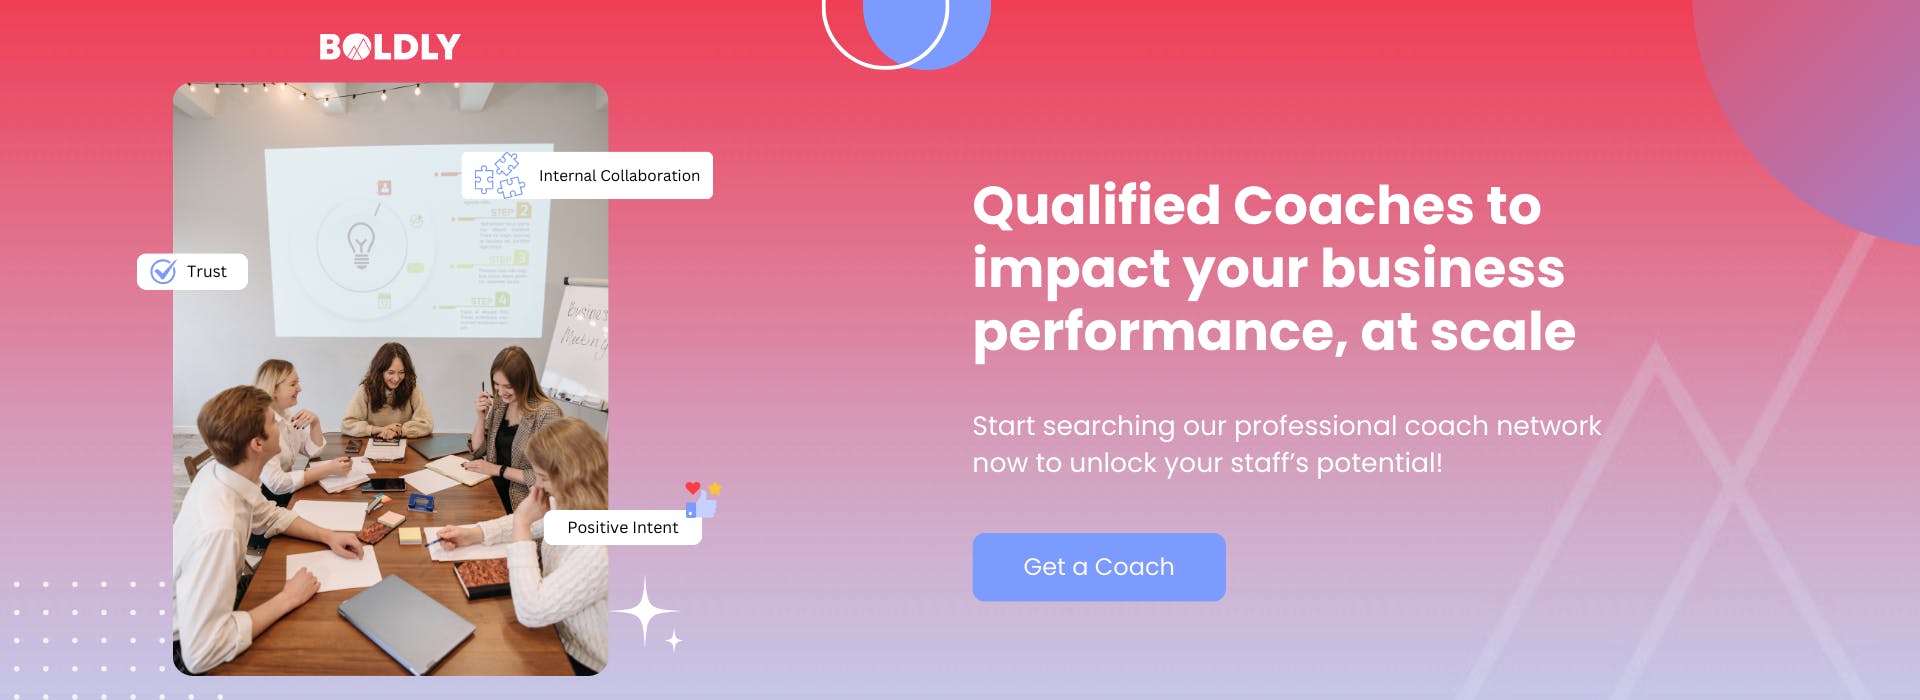 Find a qualified coach at BOLDLY